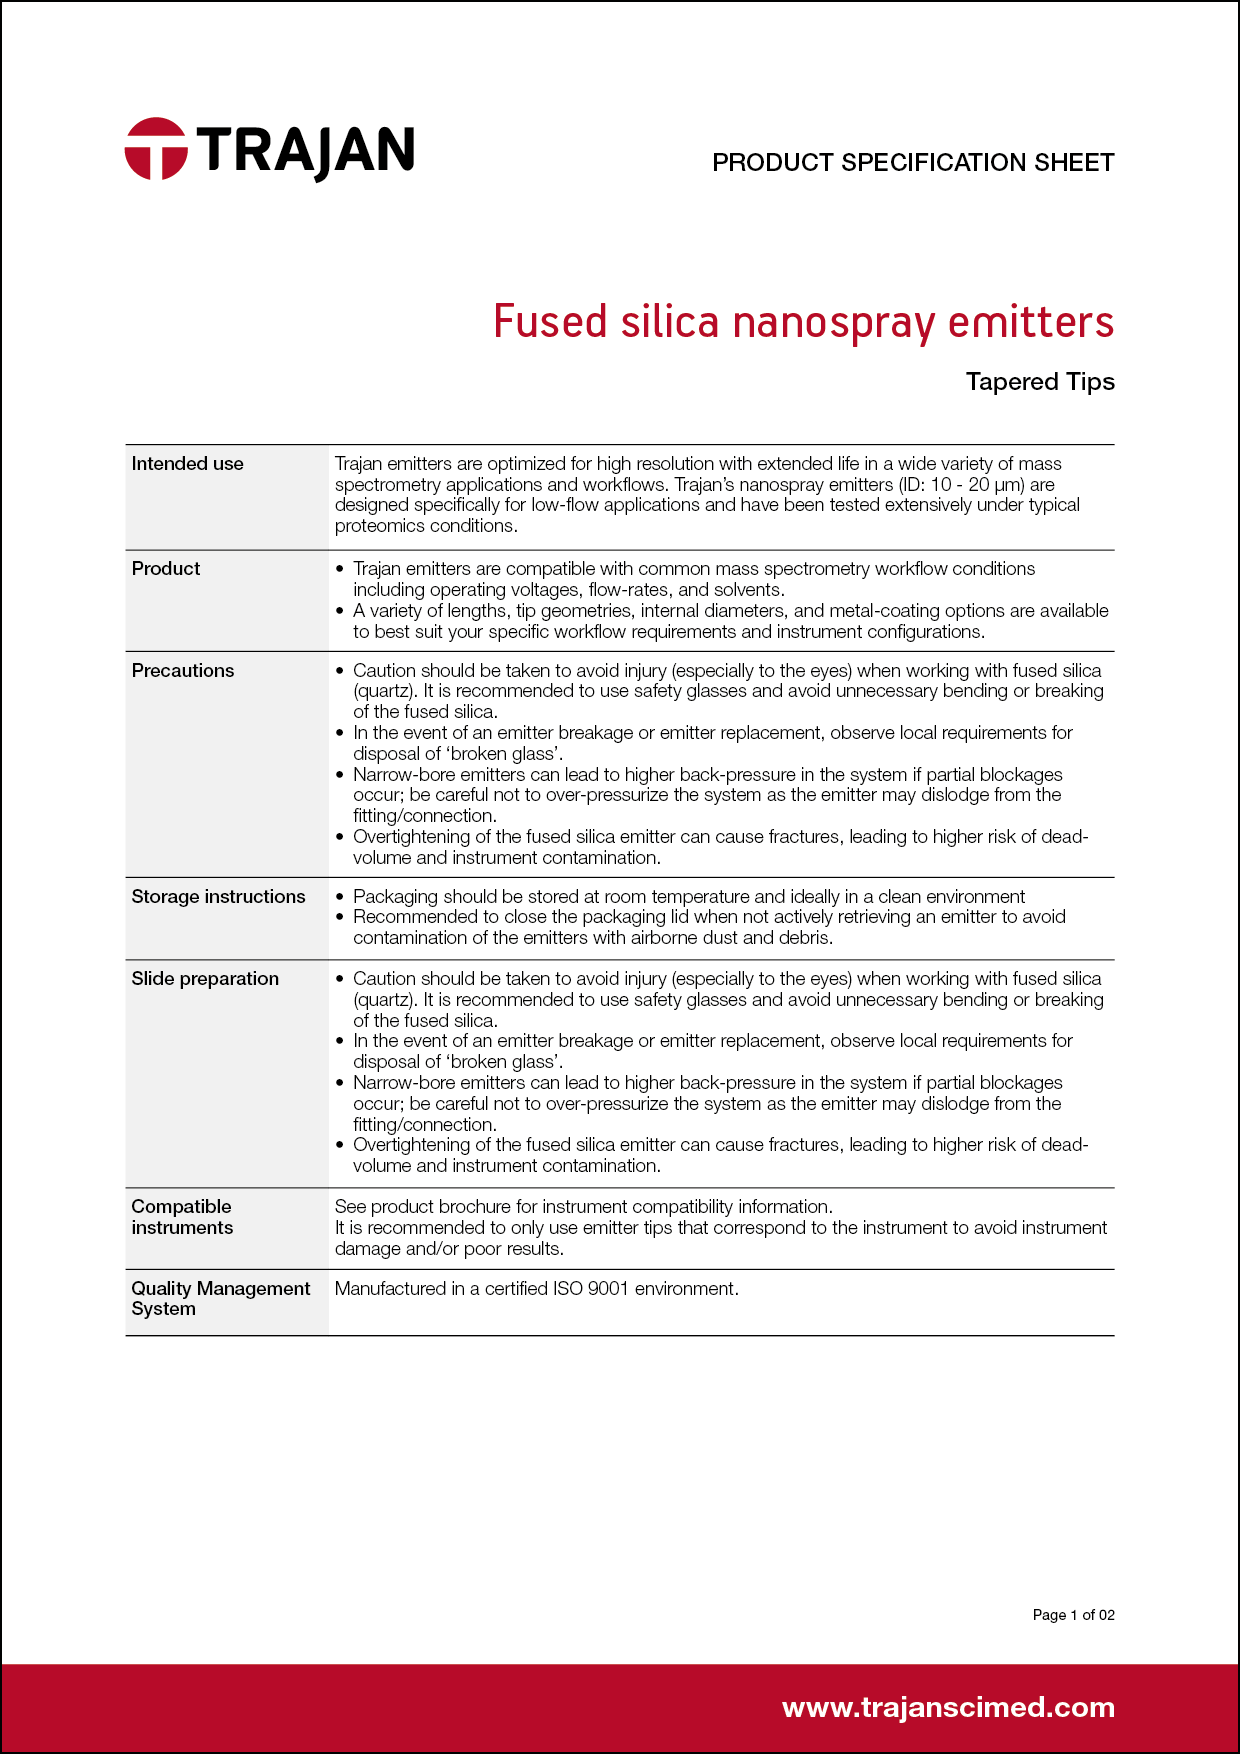 Product Specification Sheet - Fused silica nanospray emitters